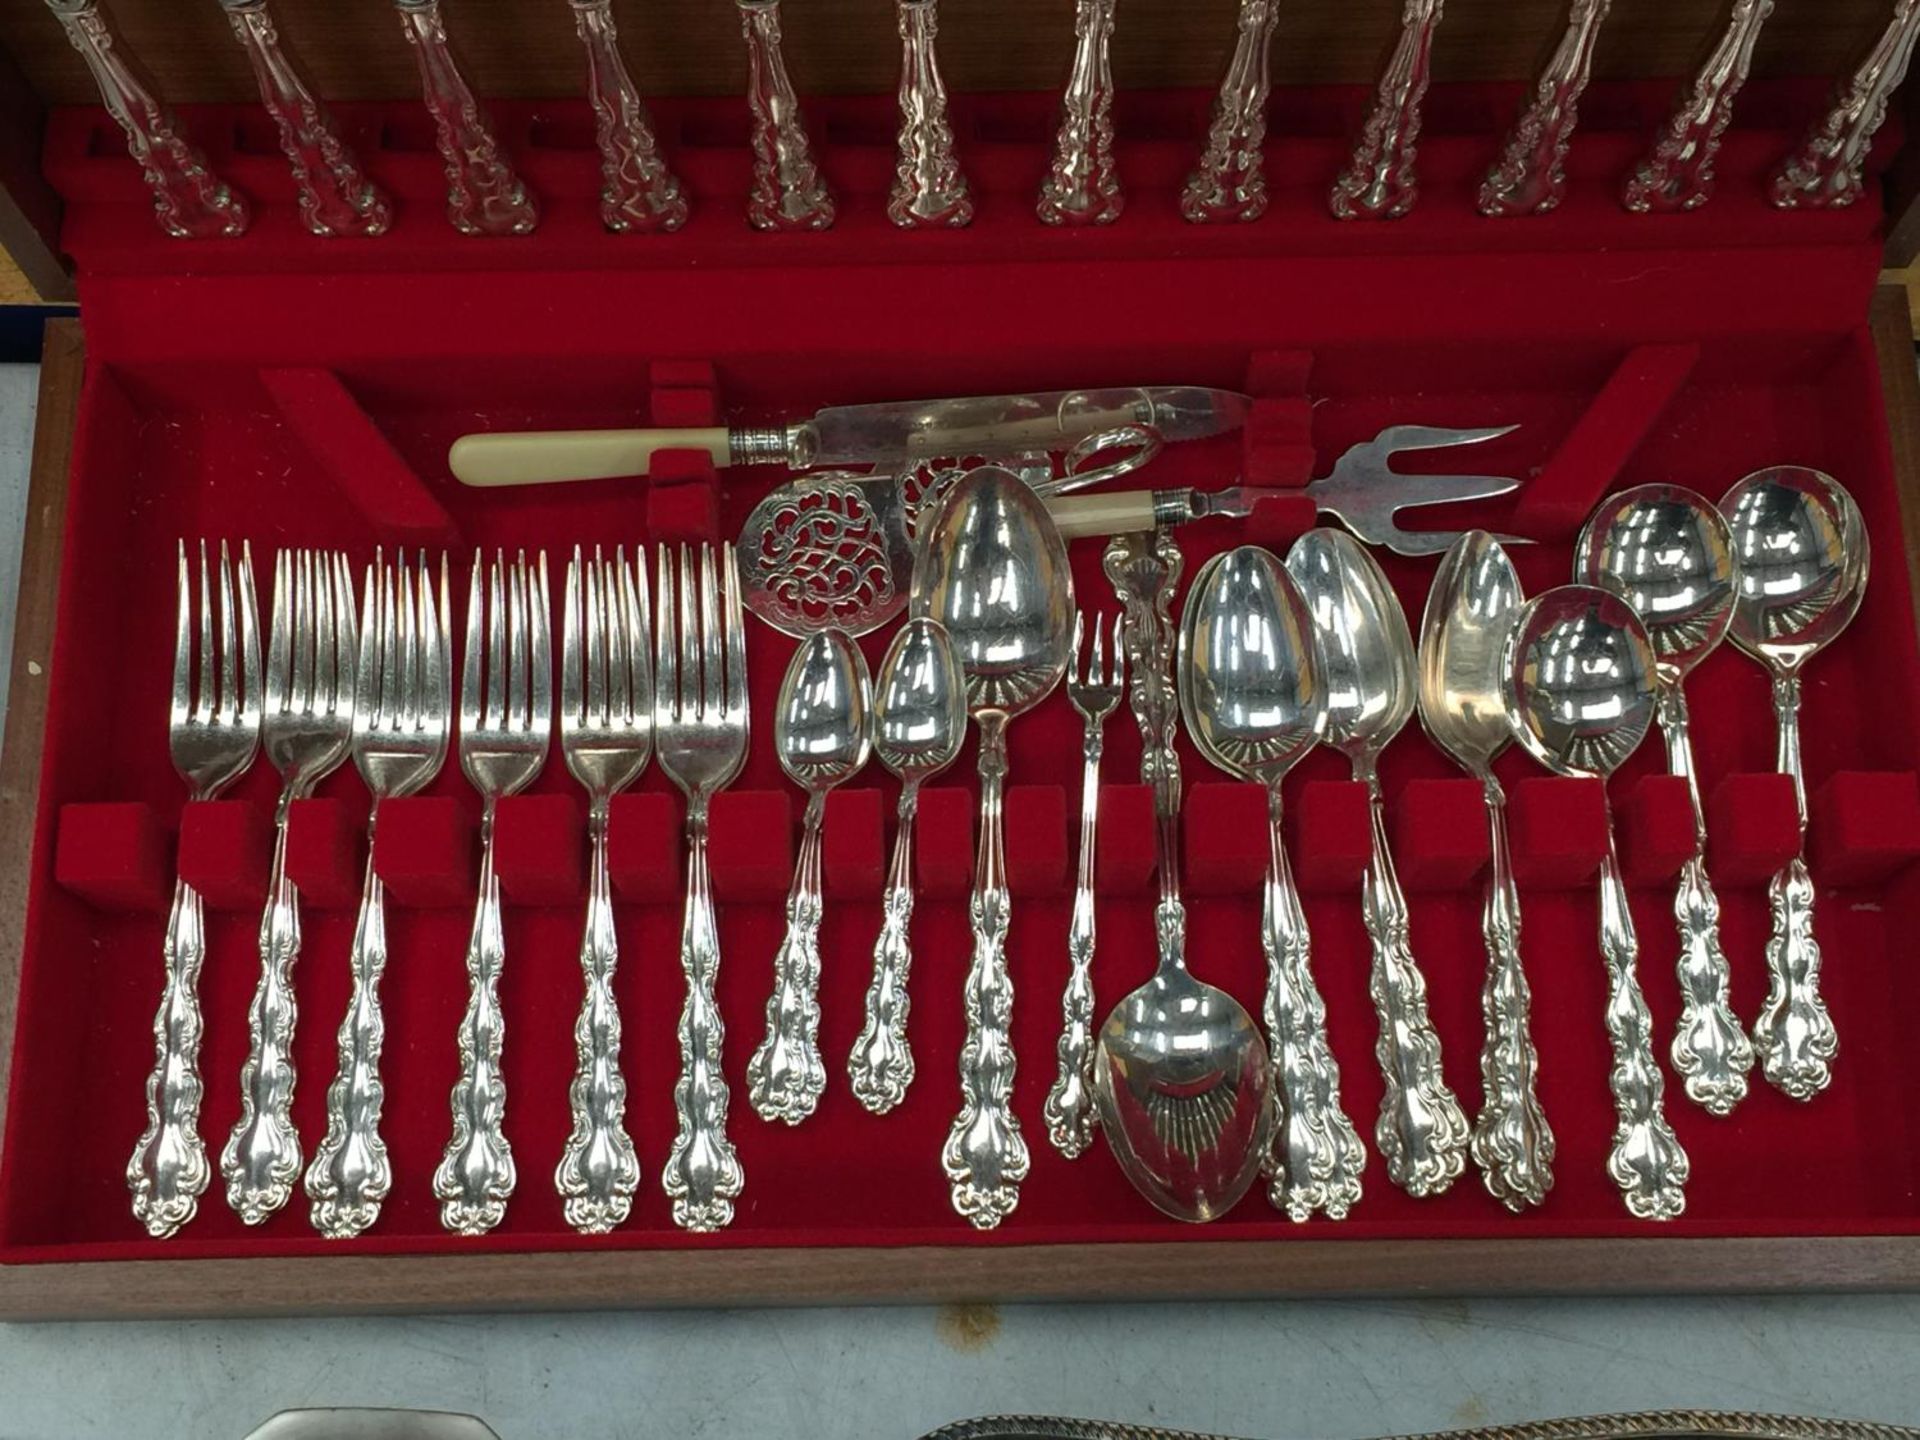 A 48 PIECE COMMUNITY FLATWARE SET IN DISPLAY CASE - Image 3 of 12